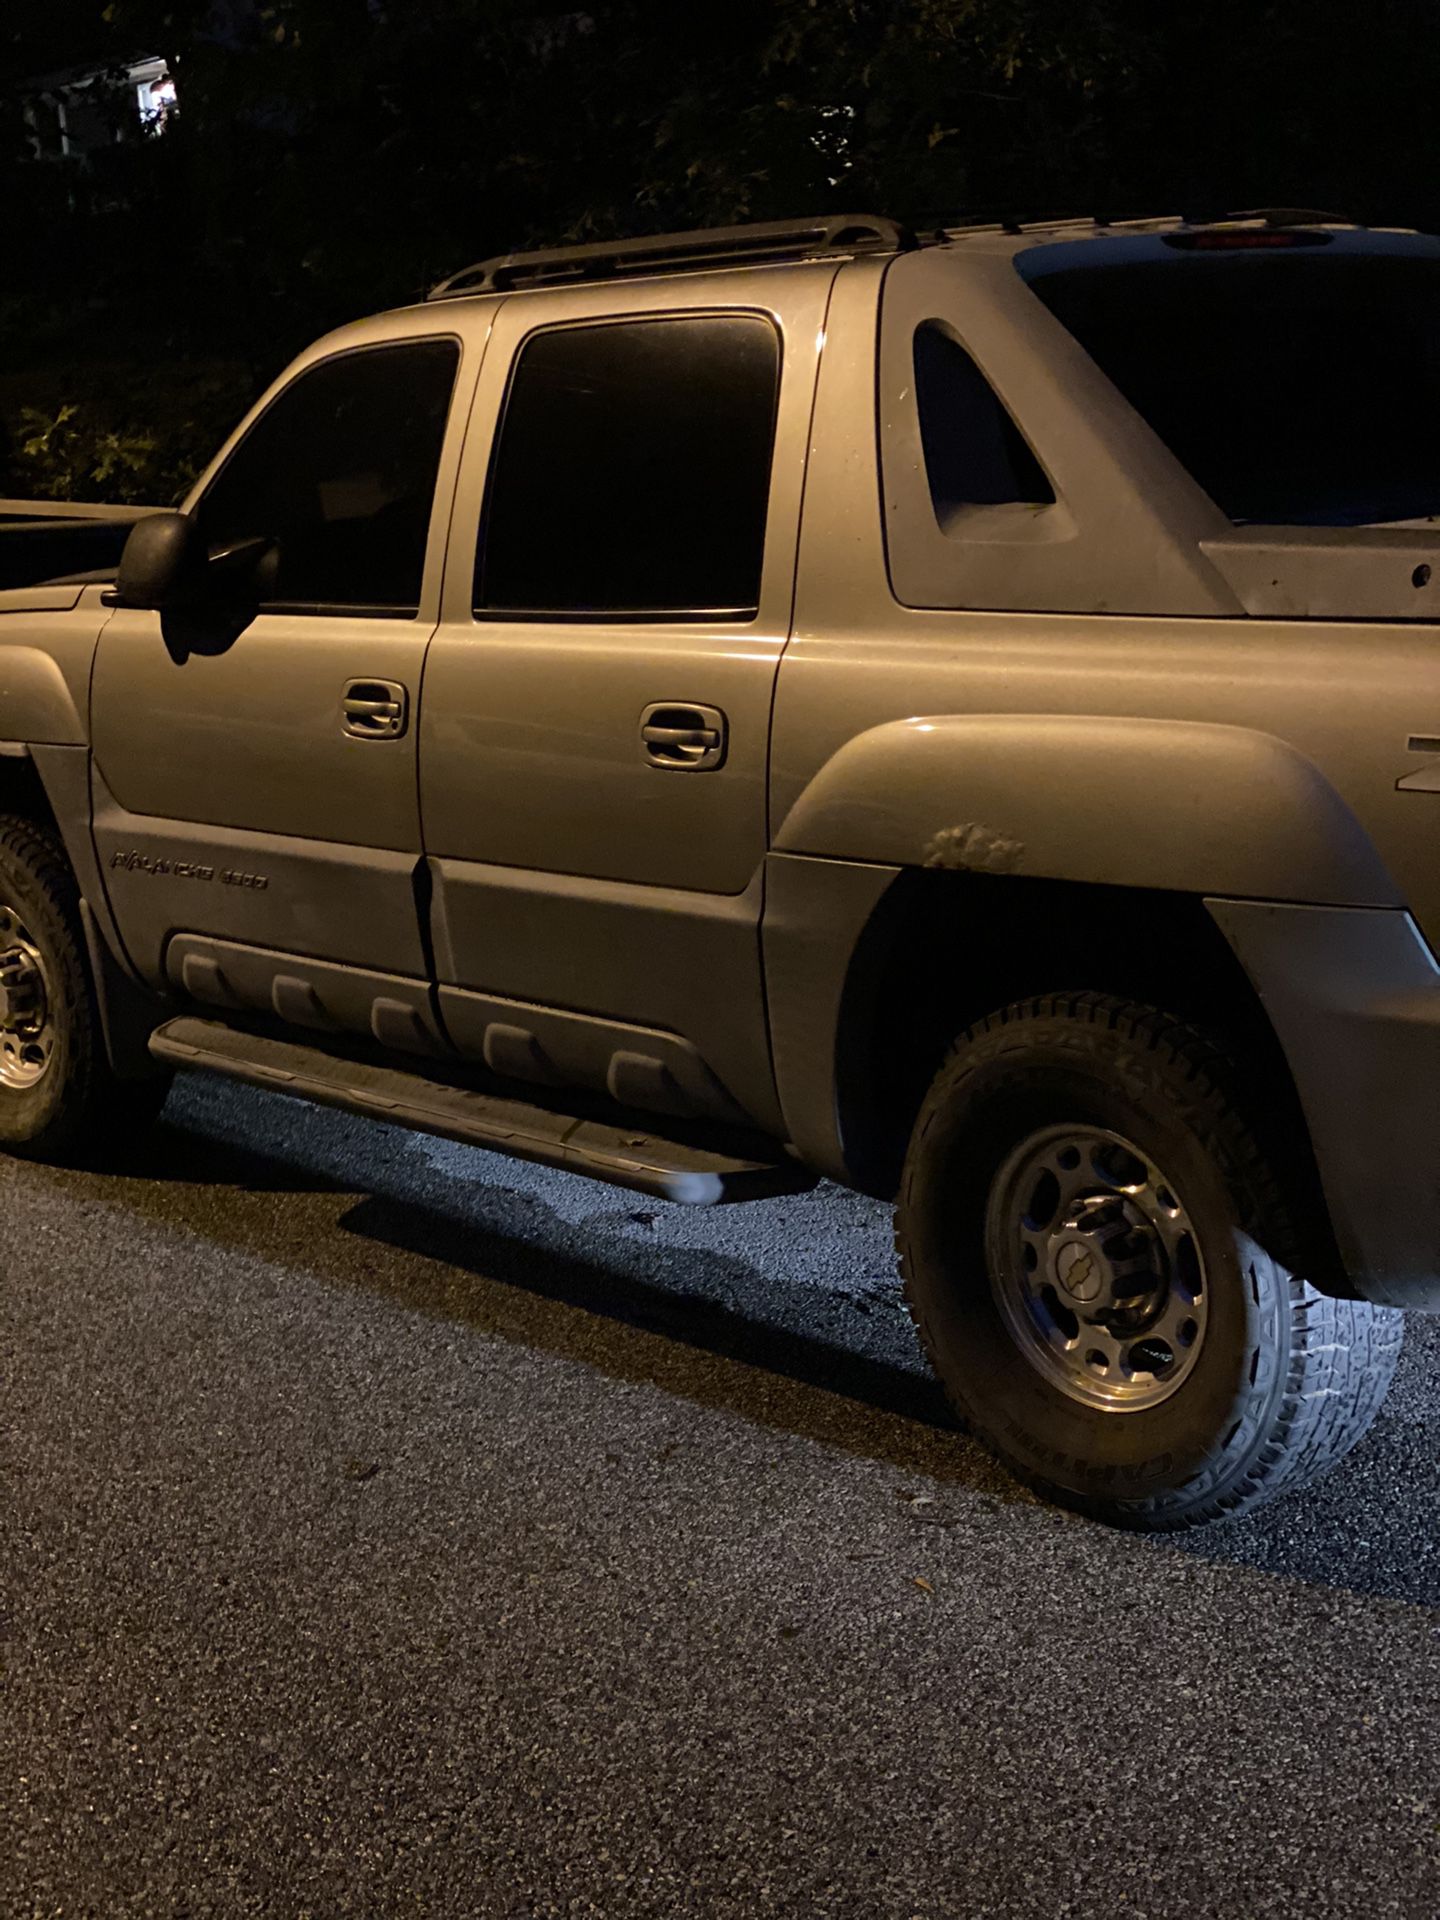 2002 Chevy avalanche 2500